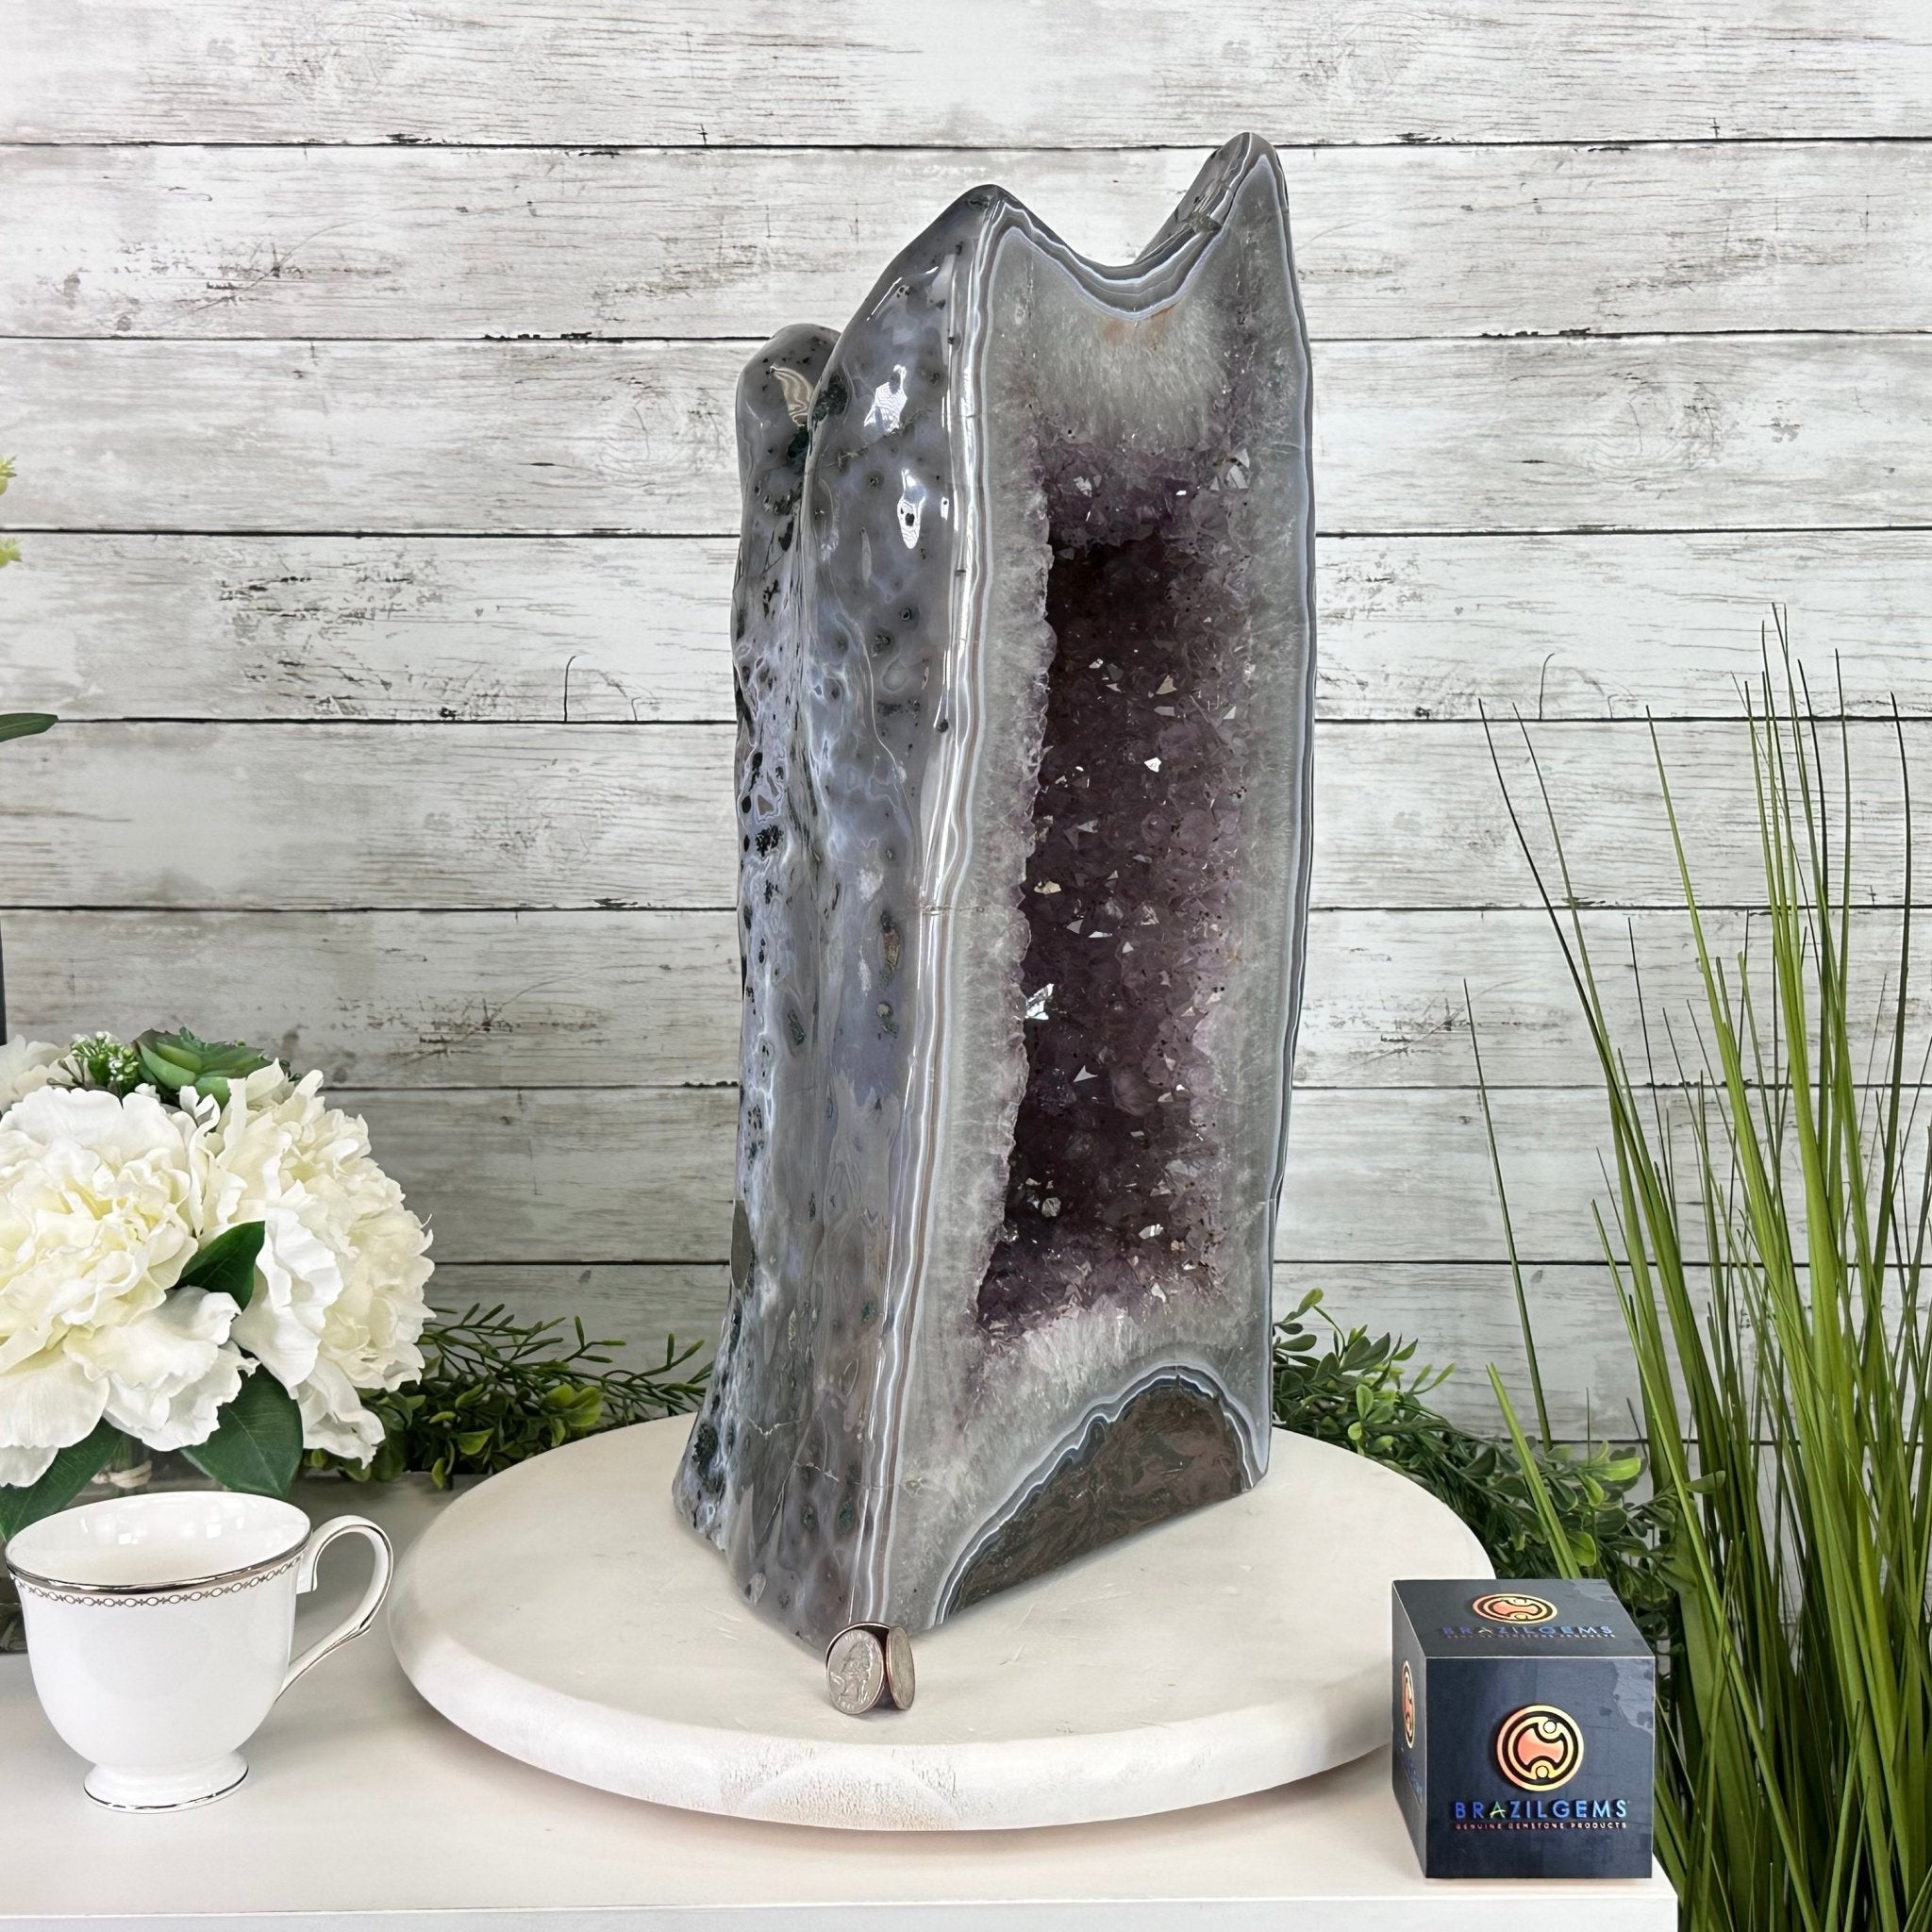 Extra Quality Polished Brazilian Amethyst Cathedral, 47.2 lbs & 18.6" tall Model #5602-0194 by Brazil Gems - Brazil GemsBrazil GemsExtra Quality Polished Brazilian Amethyst Cathedral, 47.2 lbs & 18.6" tall Model #5602-0194 by Brazil GemsPolished Cathedrals5602-0194